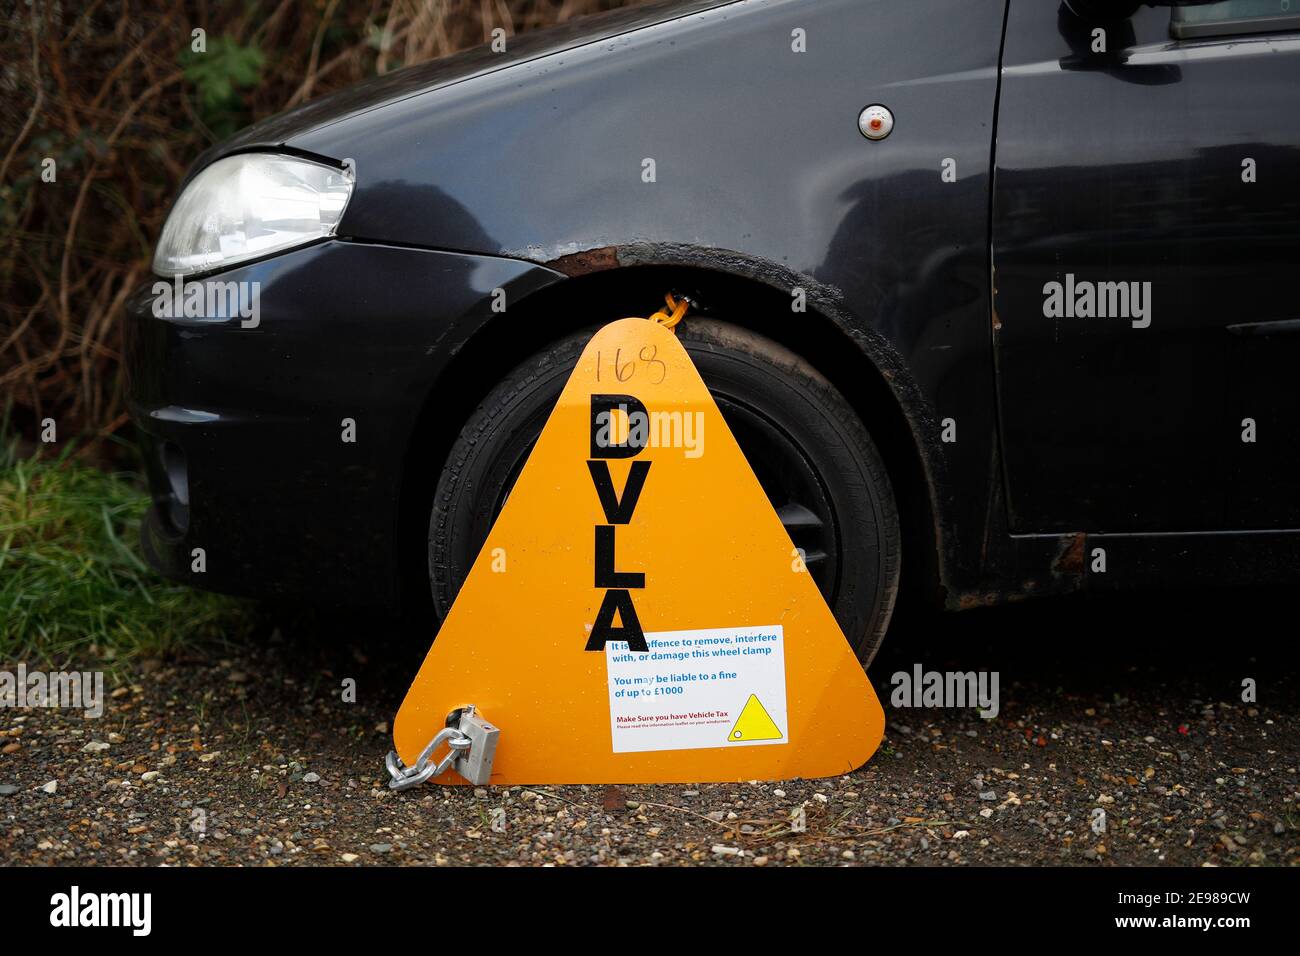 Loughborough, Leicestershire, UK. 3rd February 2021. A Fiat Punto car stands immobilised by a DVLA clamp for having no road tax.  Credit Darren Staple Stock Photo